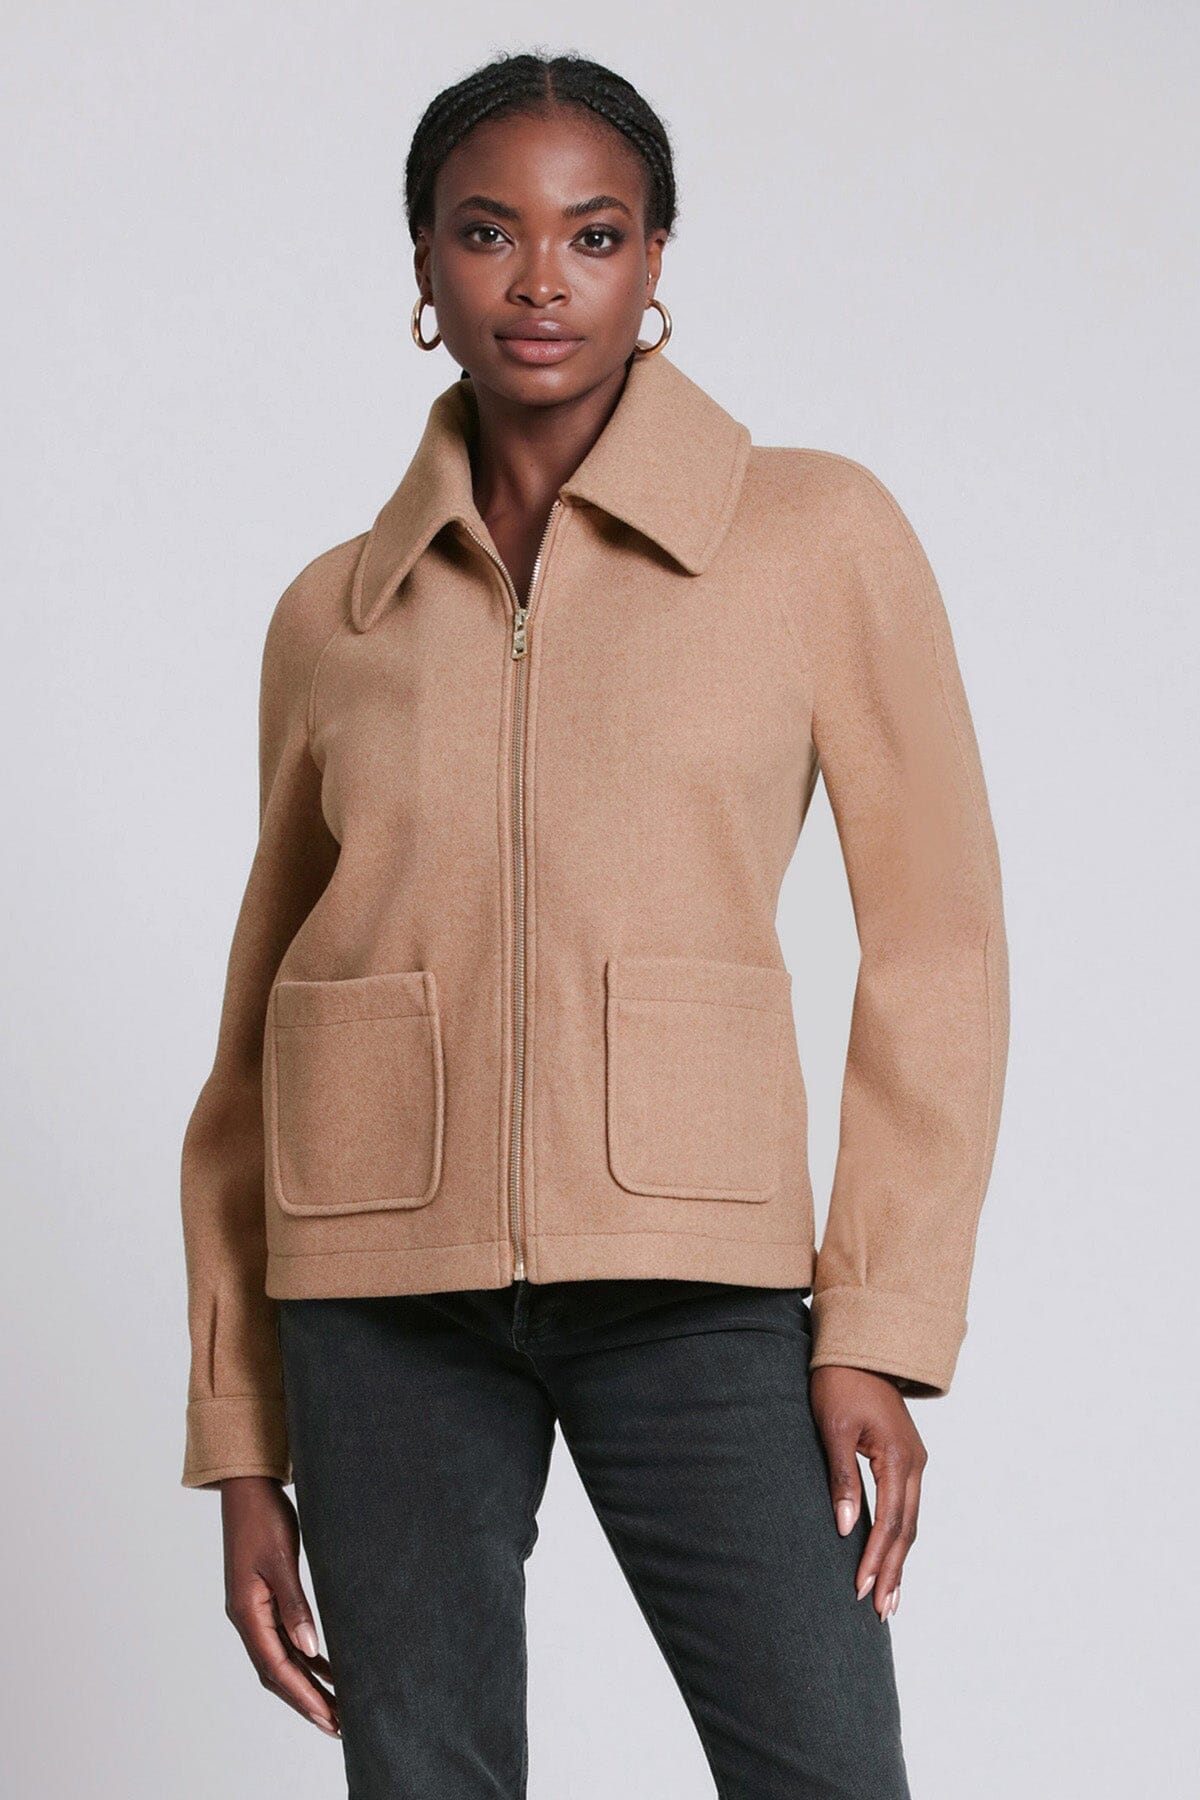 relaxed zip front jacket coat camel beige - figure flattering designer fashion day to night coats jackets for women